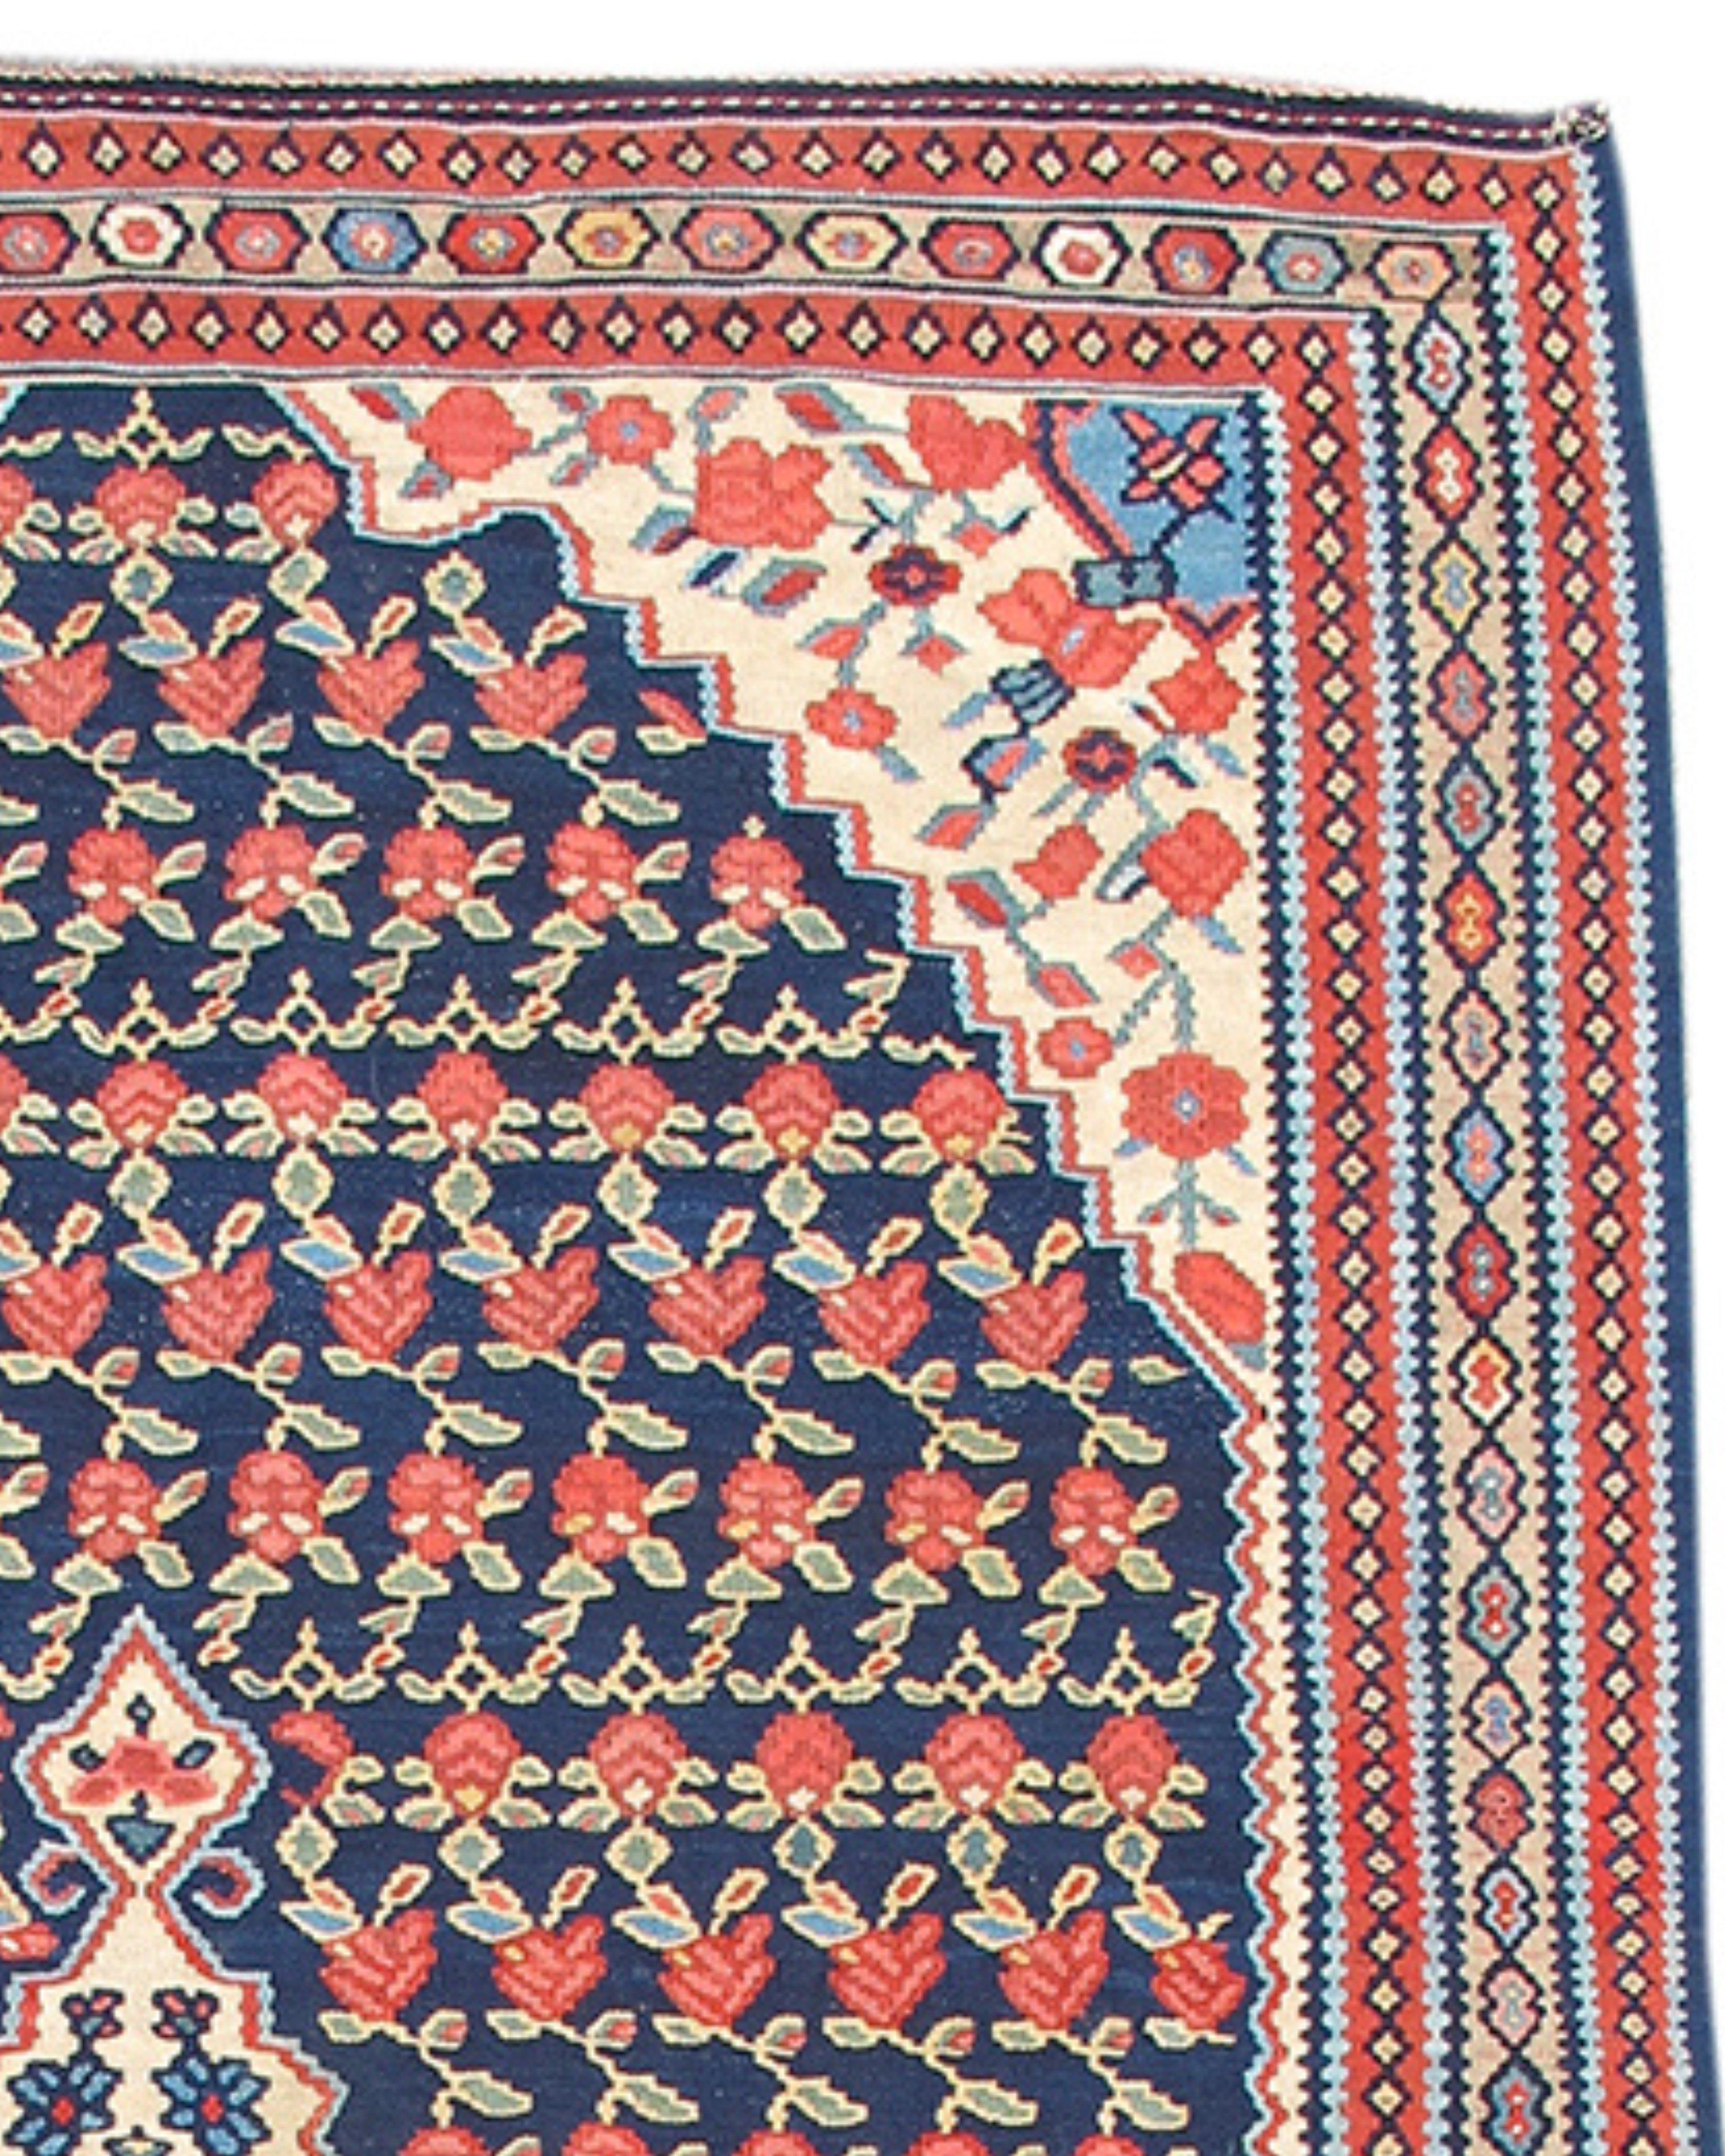 Hand-Knotted Bidjar Kilim Rug, Early 20th Century For Sale